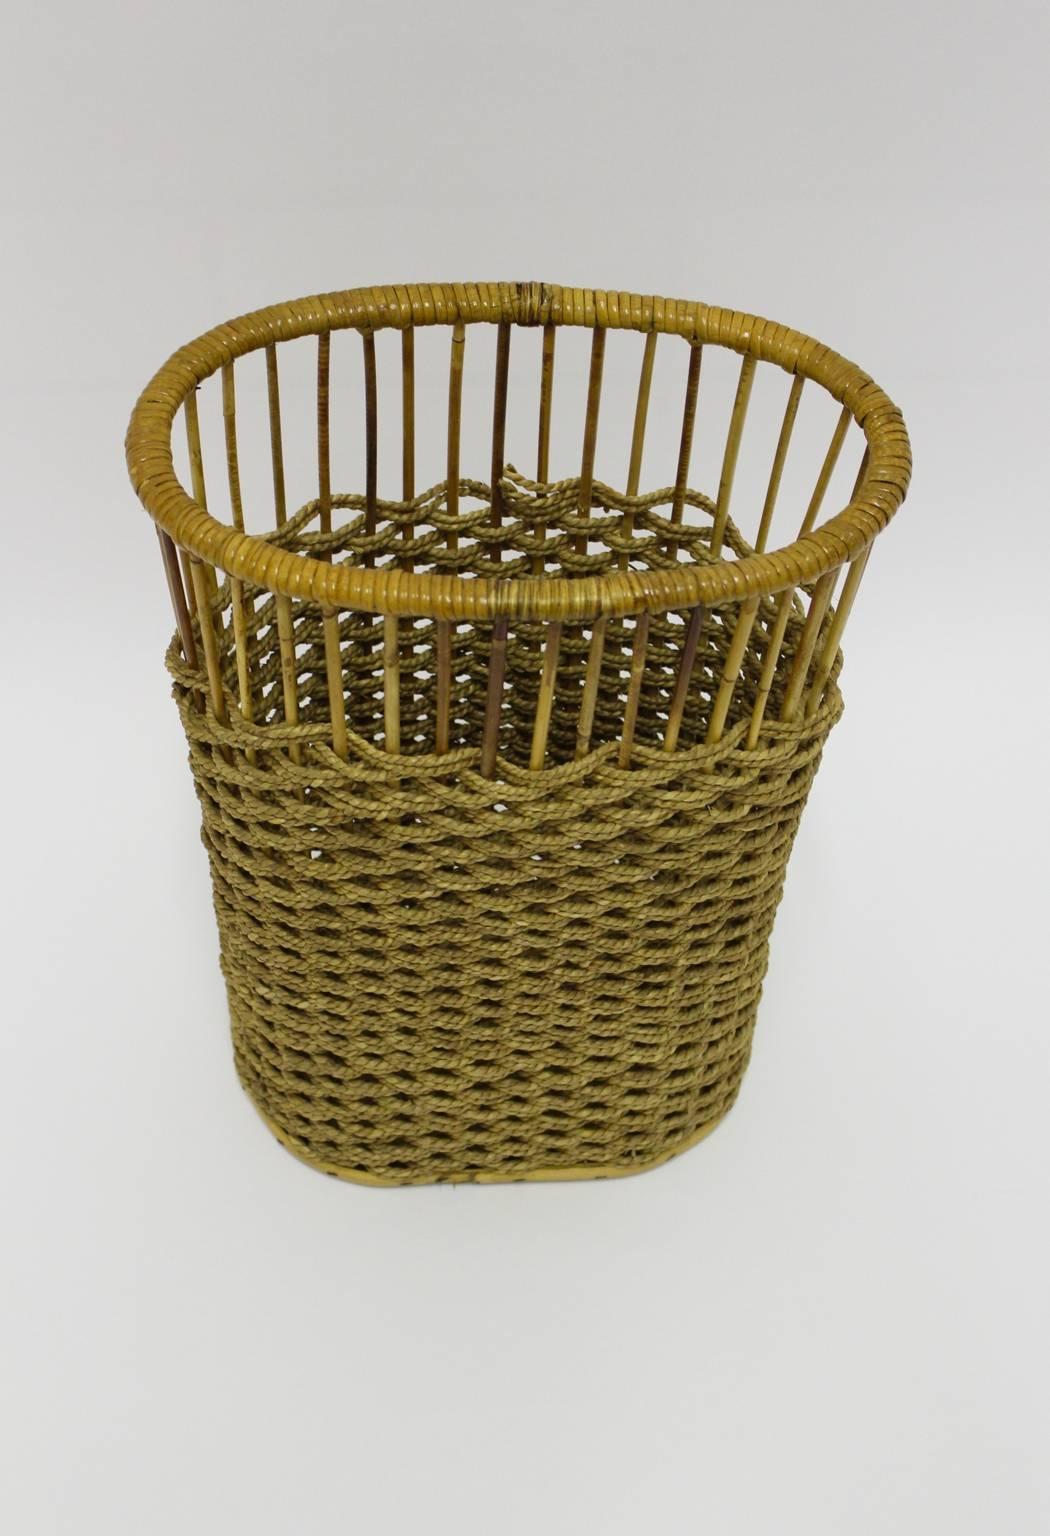 Mid century modern vintage rattan paper basket designed and executed in Austria, circa 1960.
The oval shaped paper basket was made out of rattan and sisal cords and features a chipboard bottom.
all measures are approximate